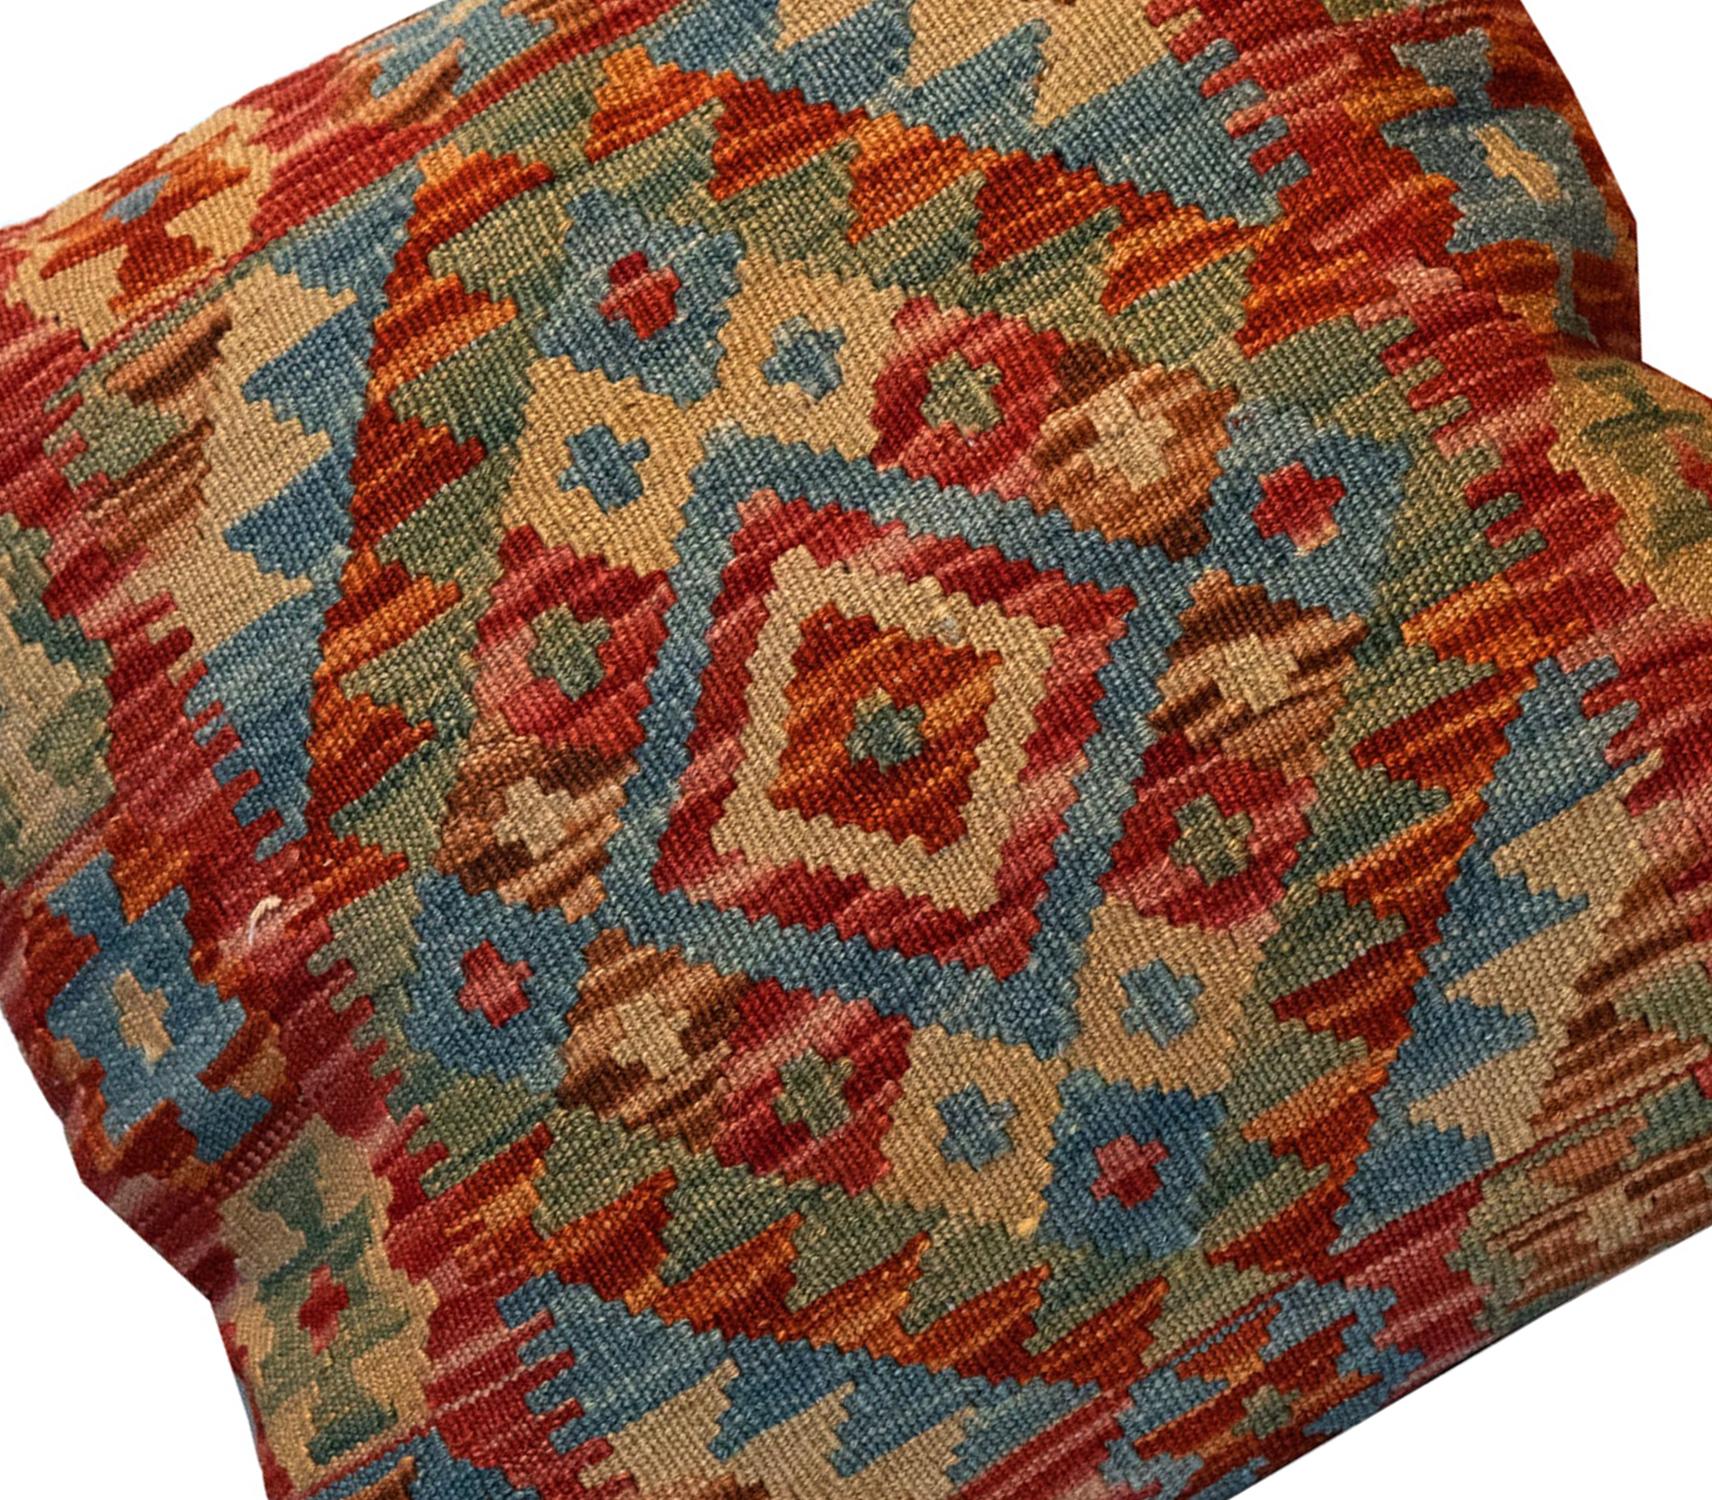 Vegetable Dyed Traditional Kilim Cushion Cover Handmade Wool Geometric Scatter Pillow